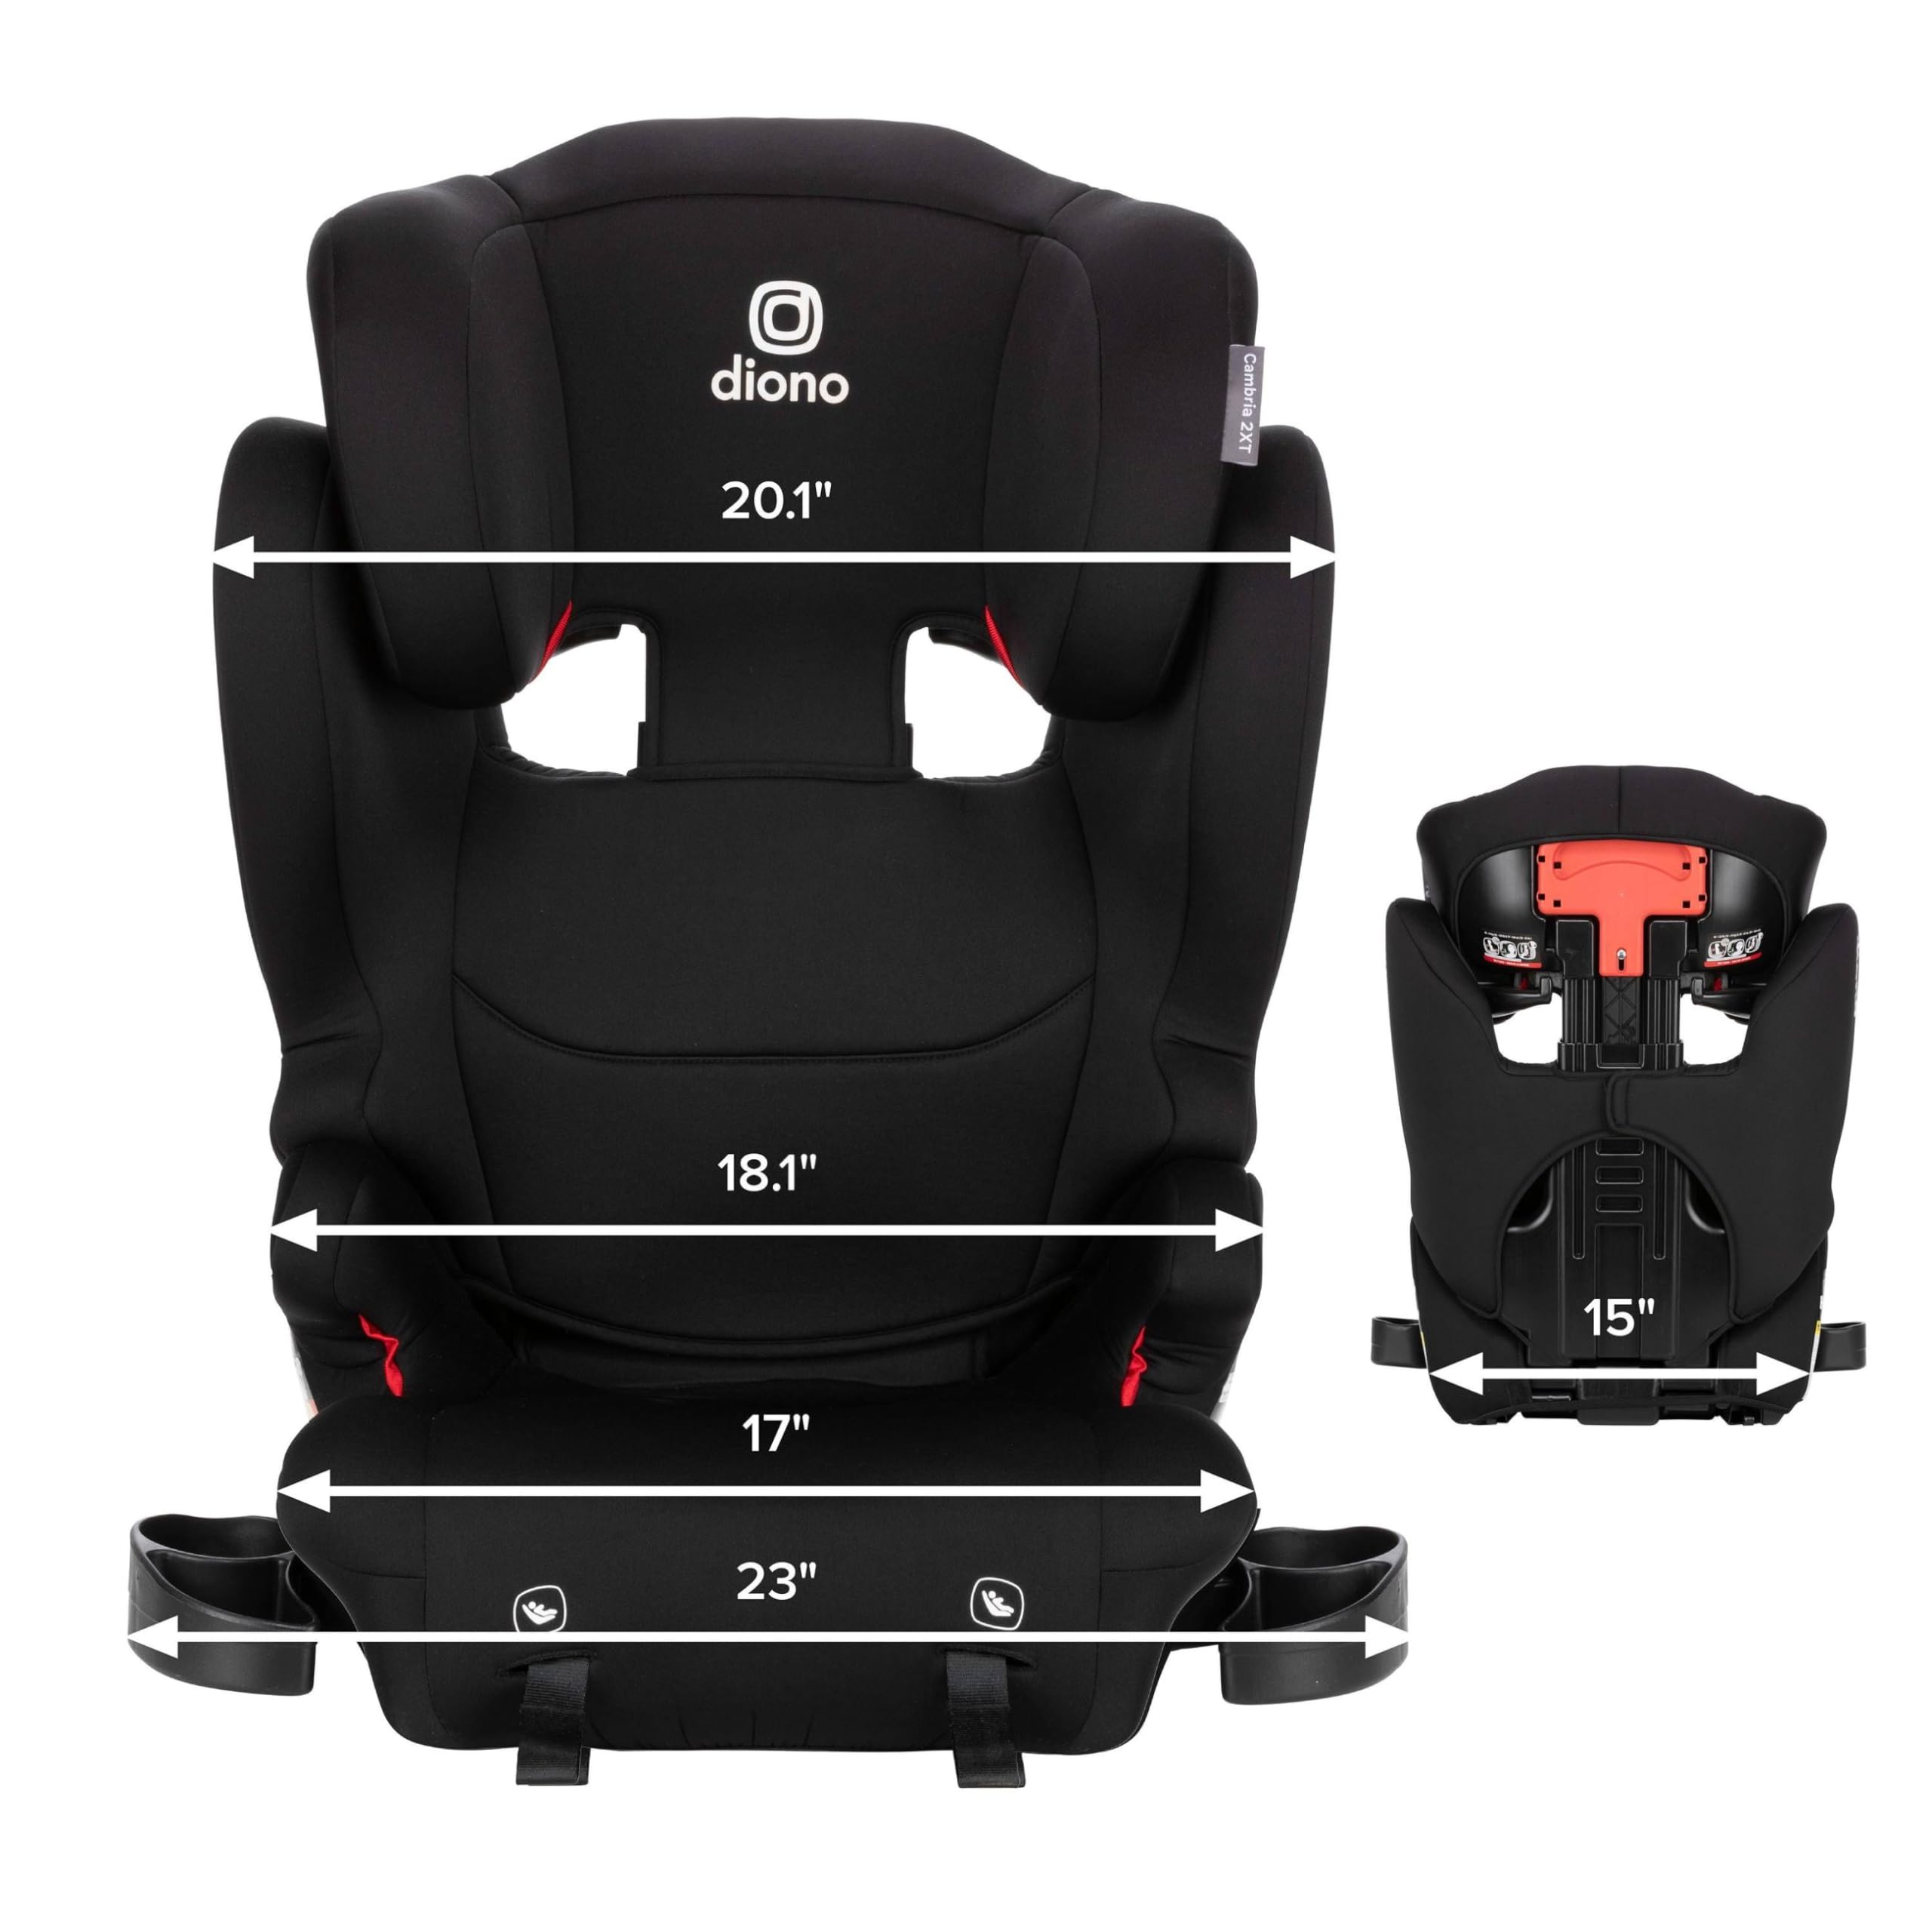 Diono Cambria 2XT XL, Dual Latch Connectors, 2-in-1 Belt Positioning Booster Seat, High-Back to Backless Booster with Space and Room to Grow, 8 Years 1 Booster Seat, Black Storm